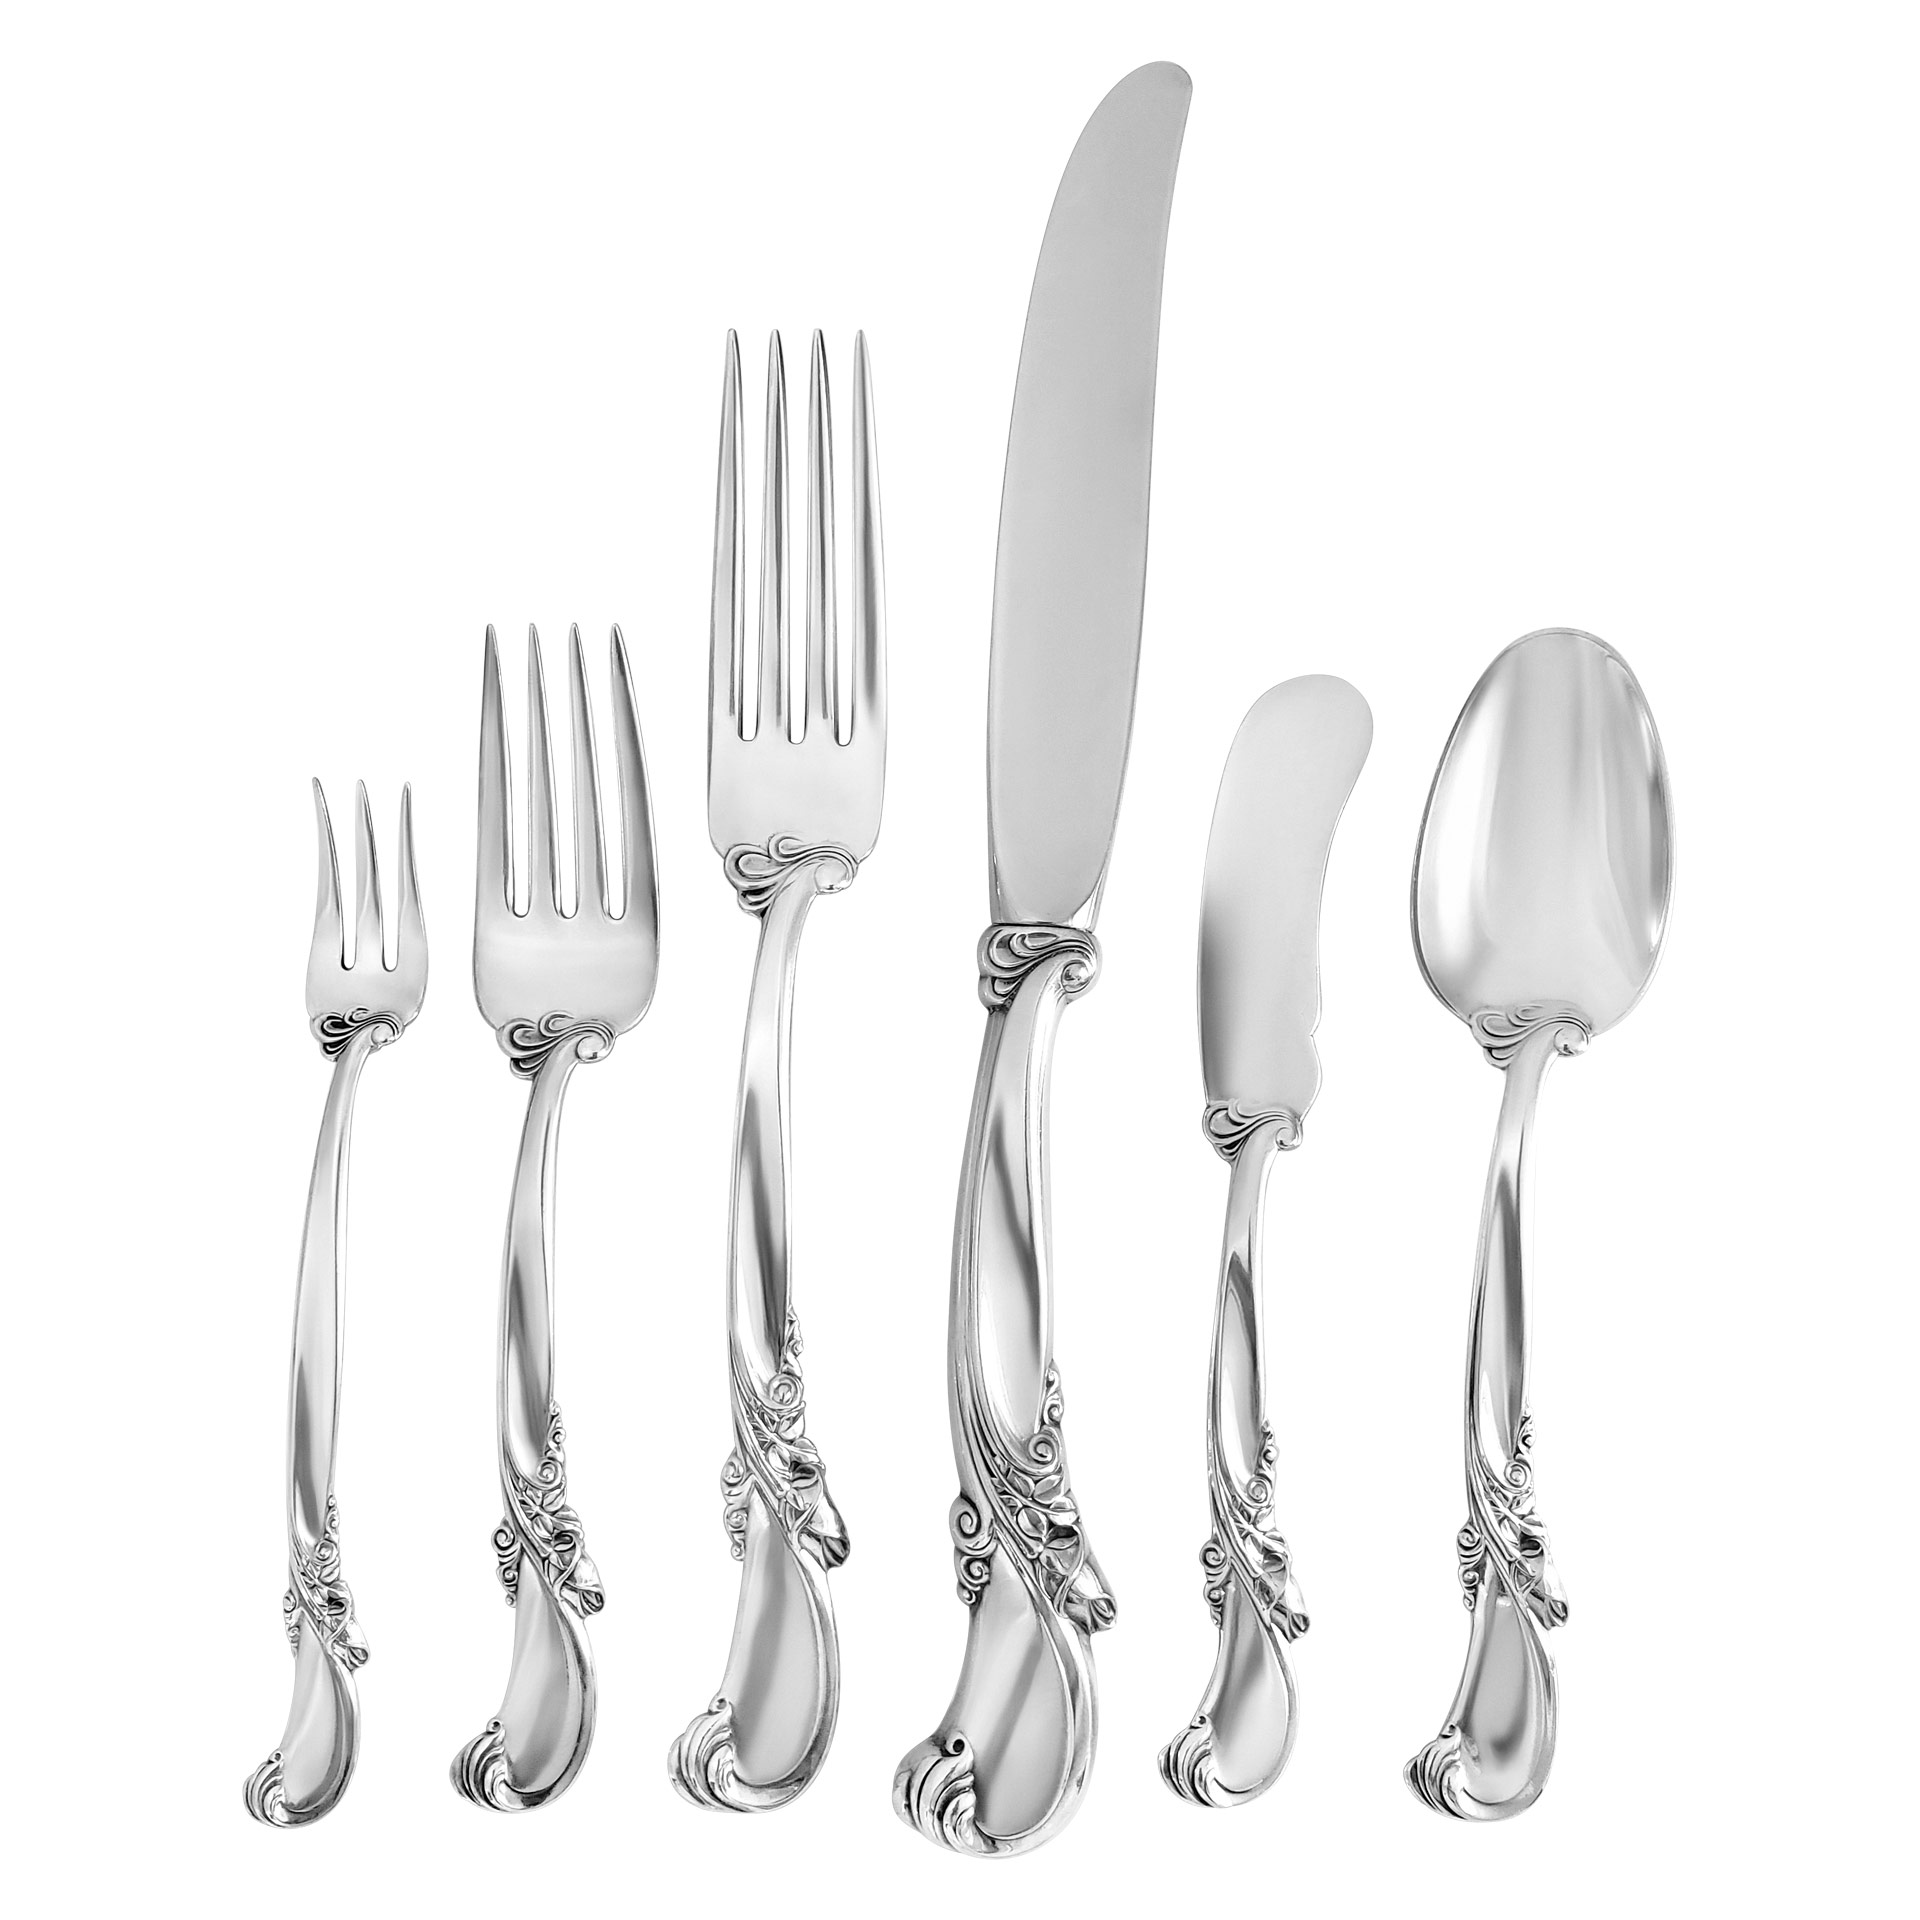 "WALTZ of SPRING" sterling silver flatware set patented by Wallace in 1952- 6 Place Setting x 12 + 5 serving pieces. Over 2900 grams sterling silver. image 1